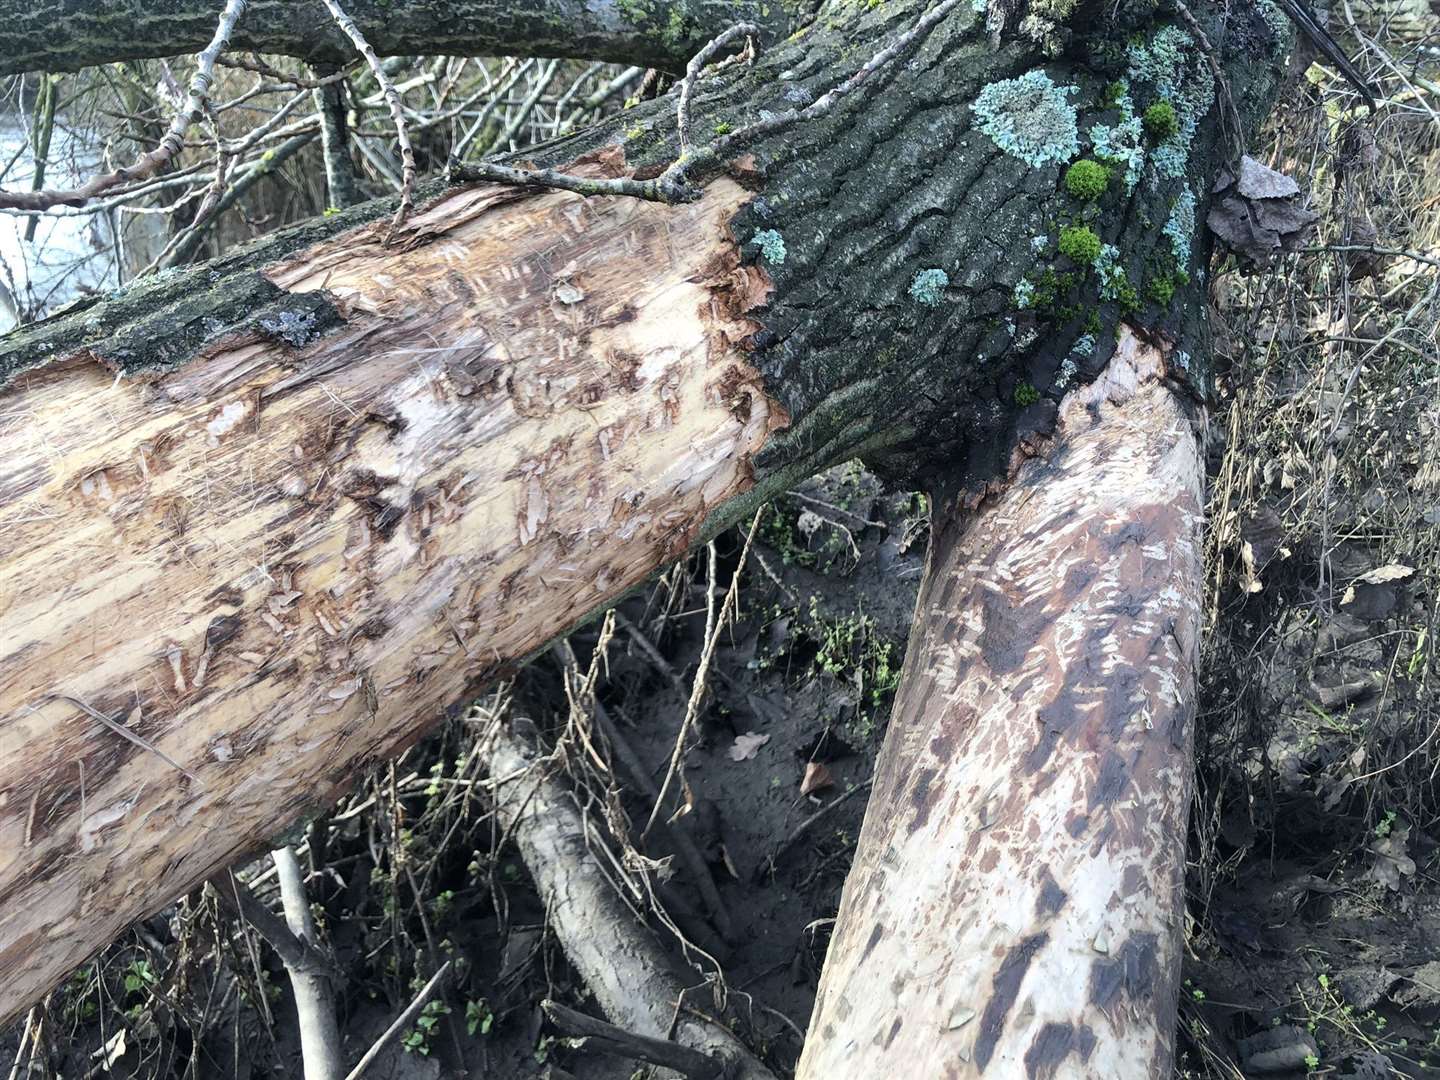 Bark peeled from tree stumps is a sign beavers live nearby. Picture: Ian Rickards